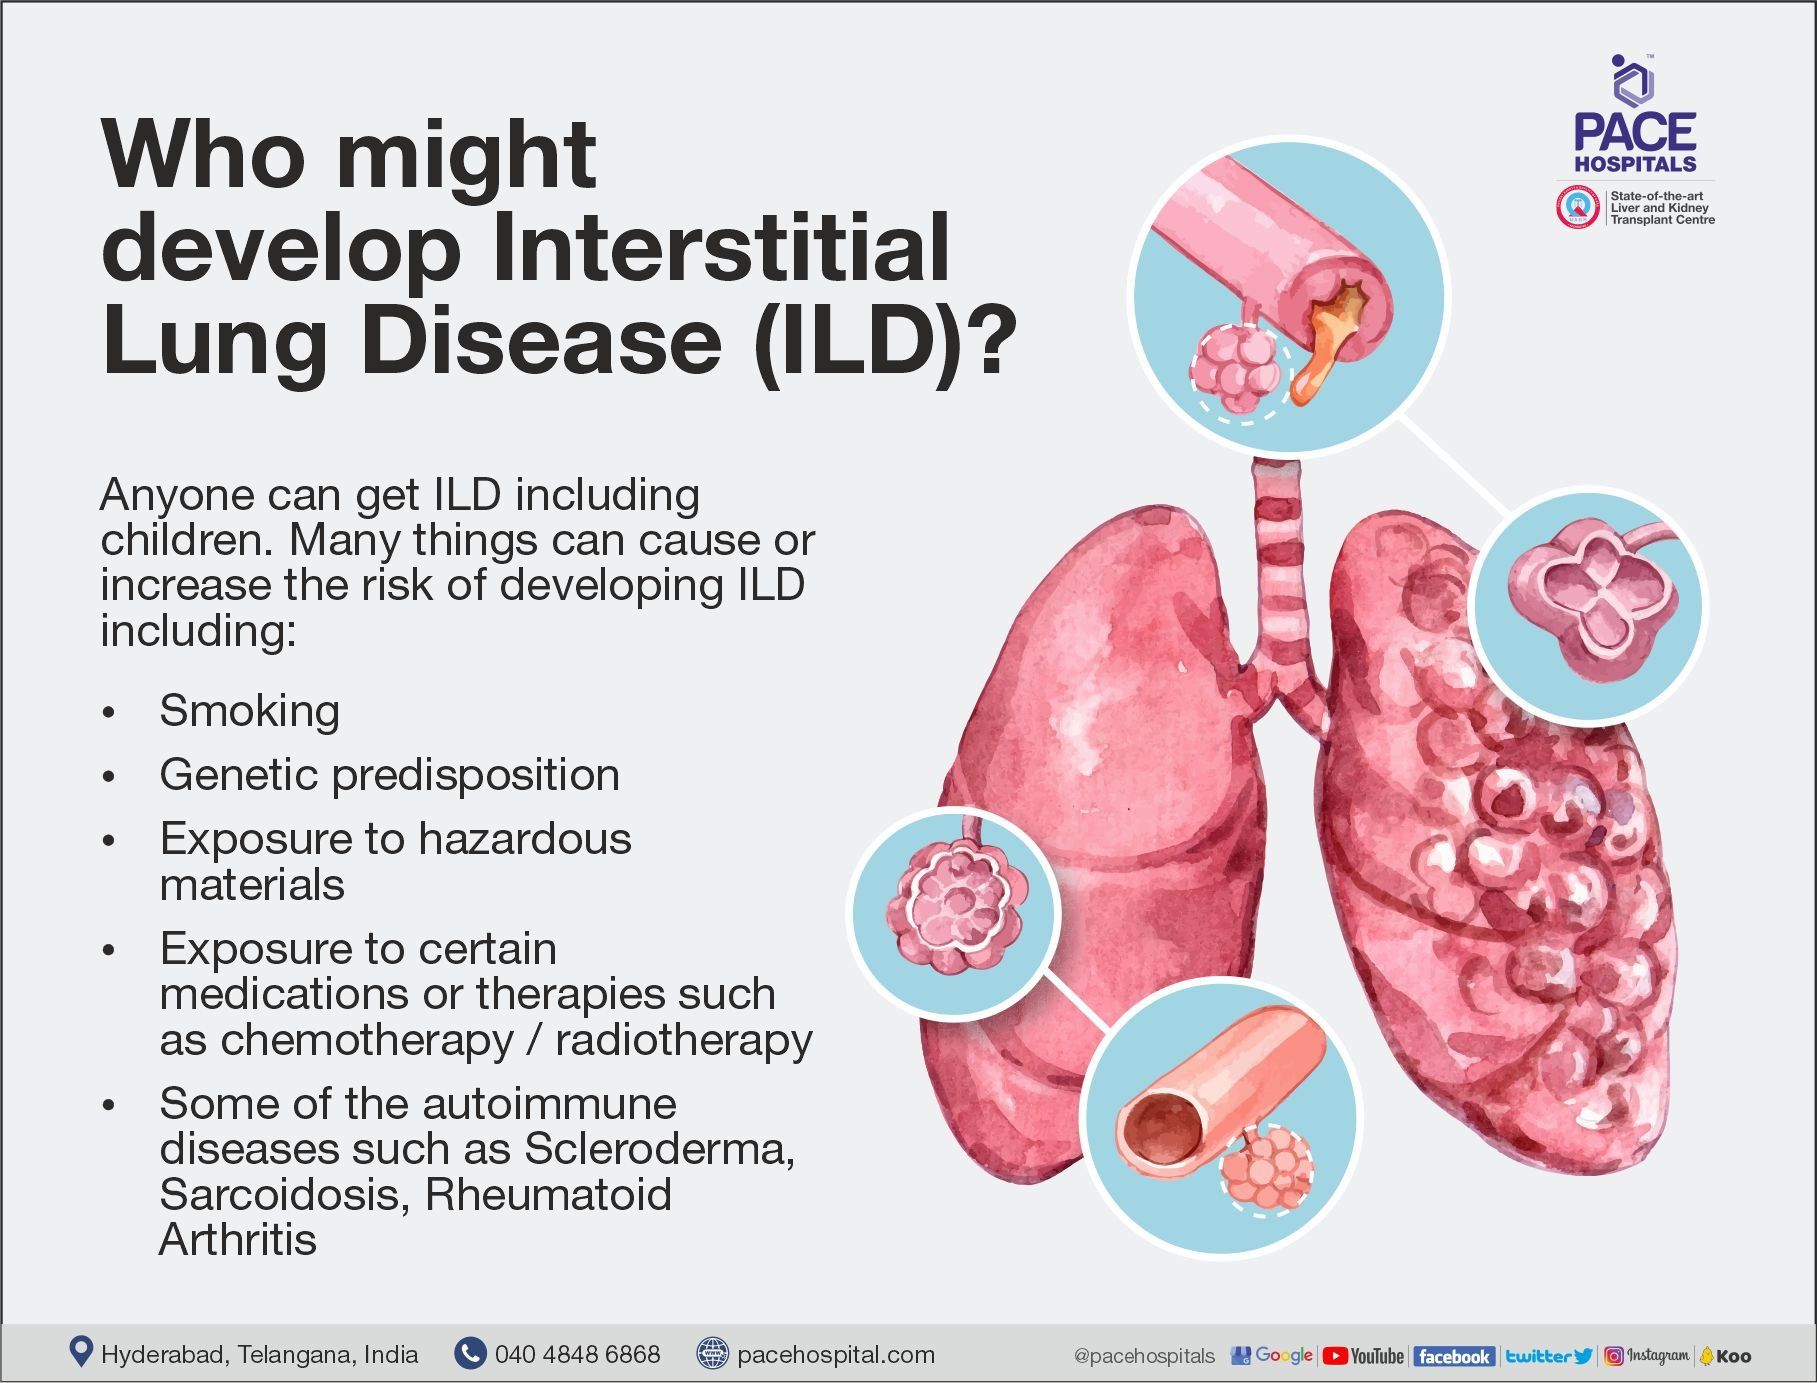 Who might develop Interstitial Lung Disease (ILD) - Causes and Risk Factors | Pace Hospitals